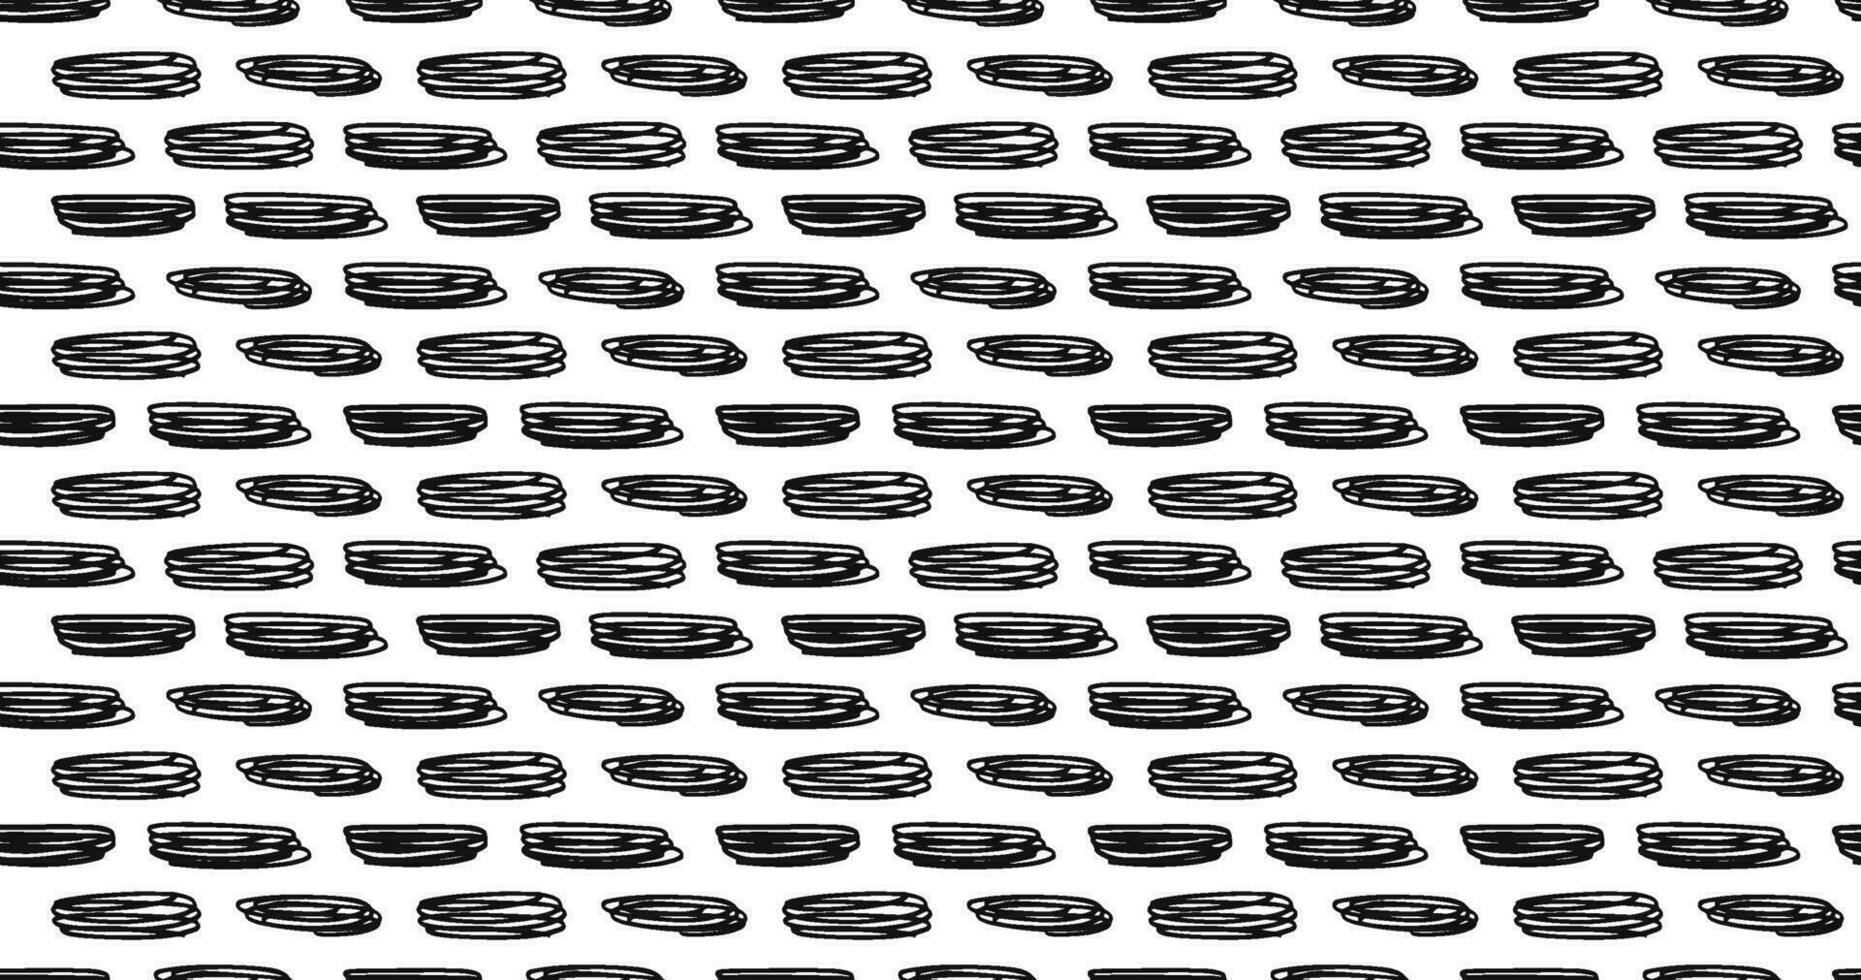 Small dash seamless pattern Dotted lines texture. Black and white hatching doodle organic shapes Short line dashes Brush hand drawn random strokes Fashion retro print design Vector Illustration